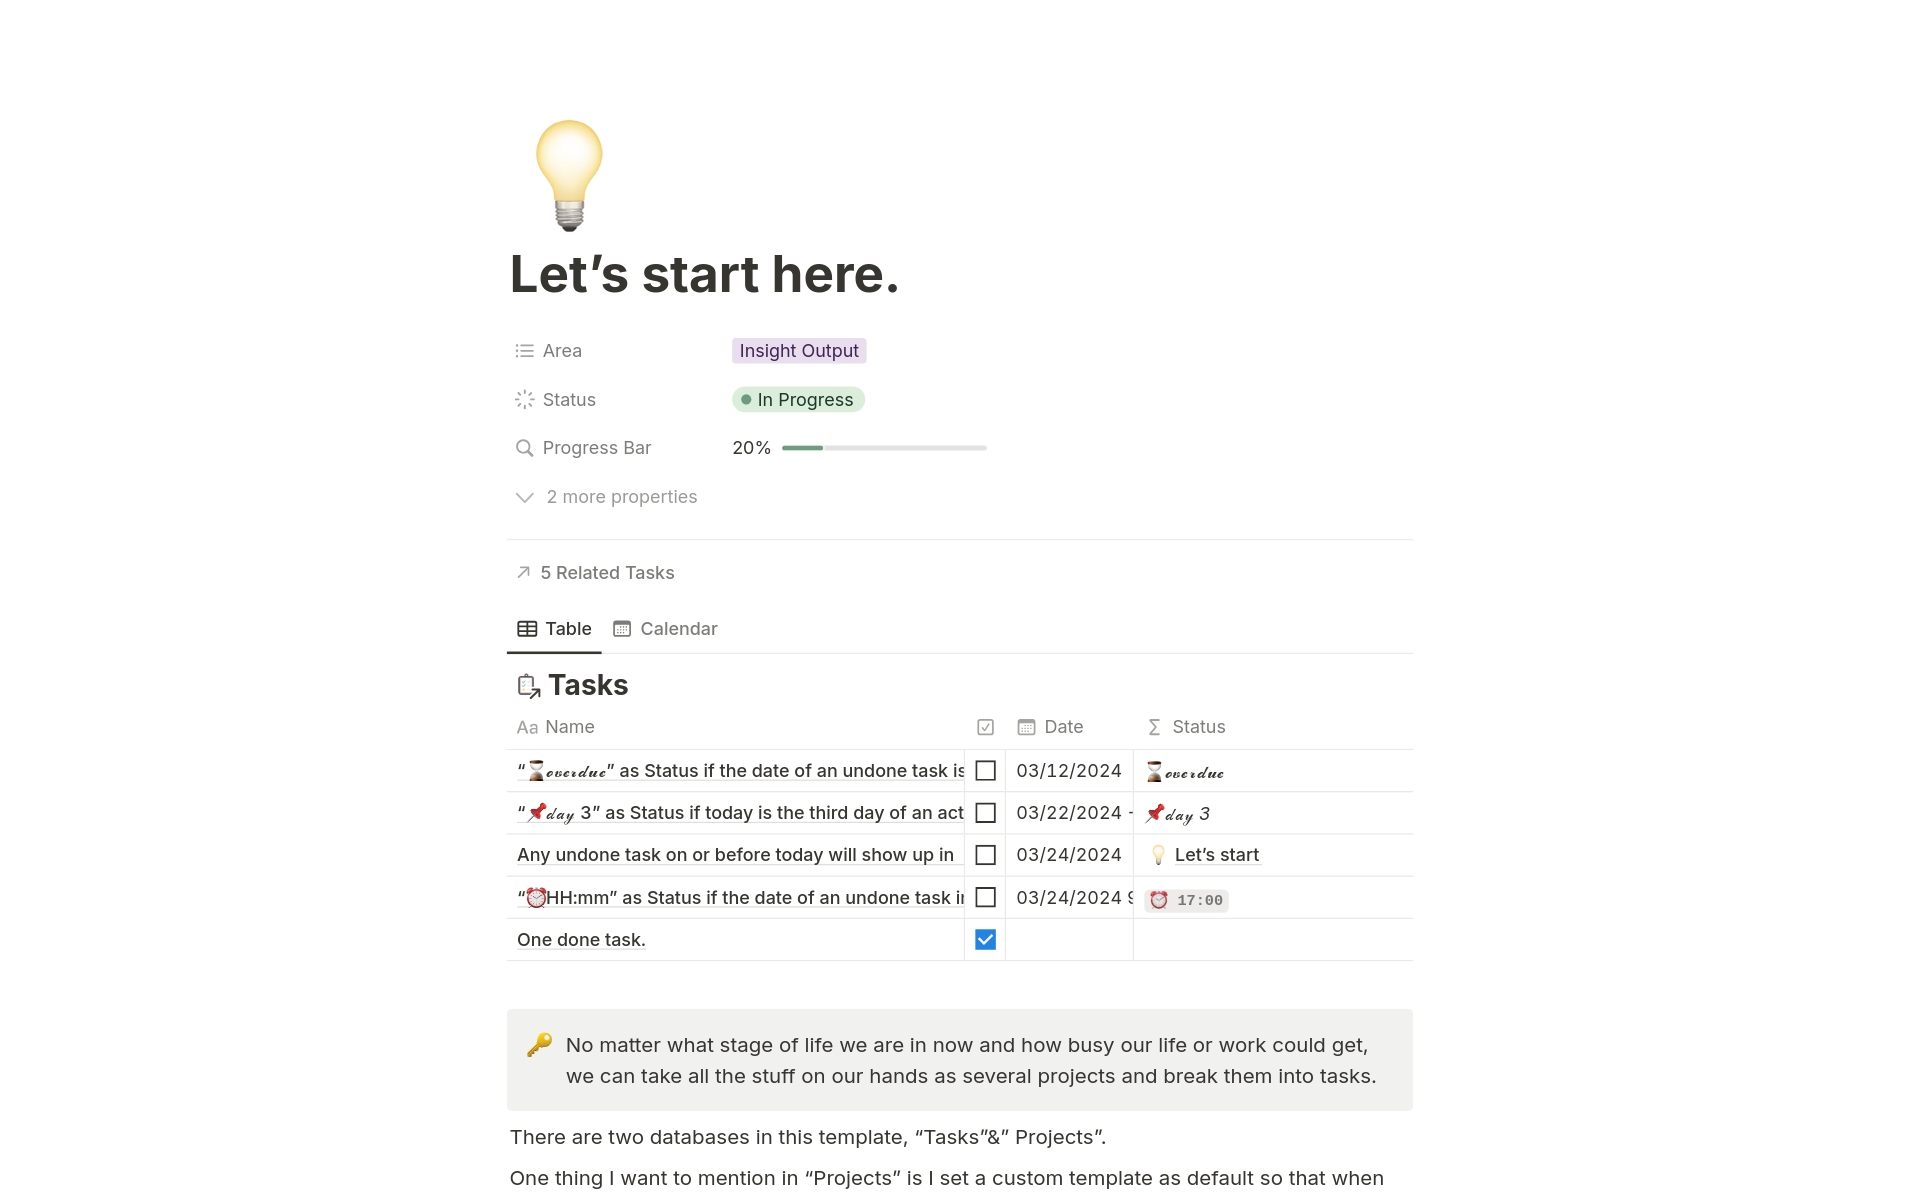 Plan and track all your projects and related tasks in one place.